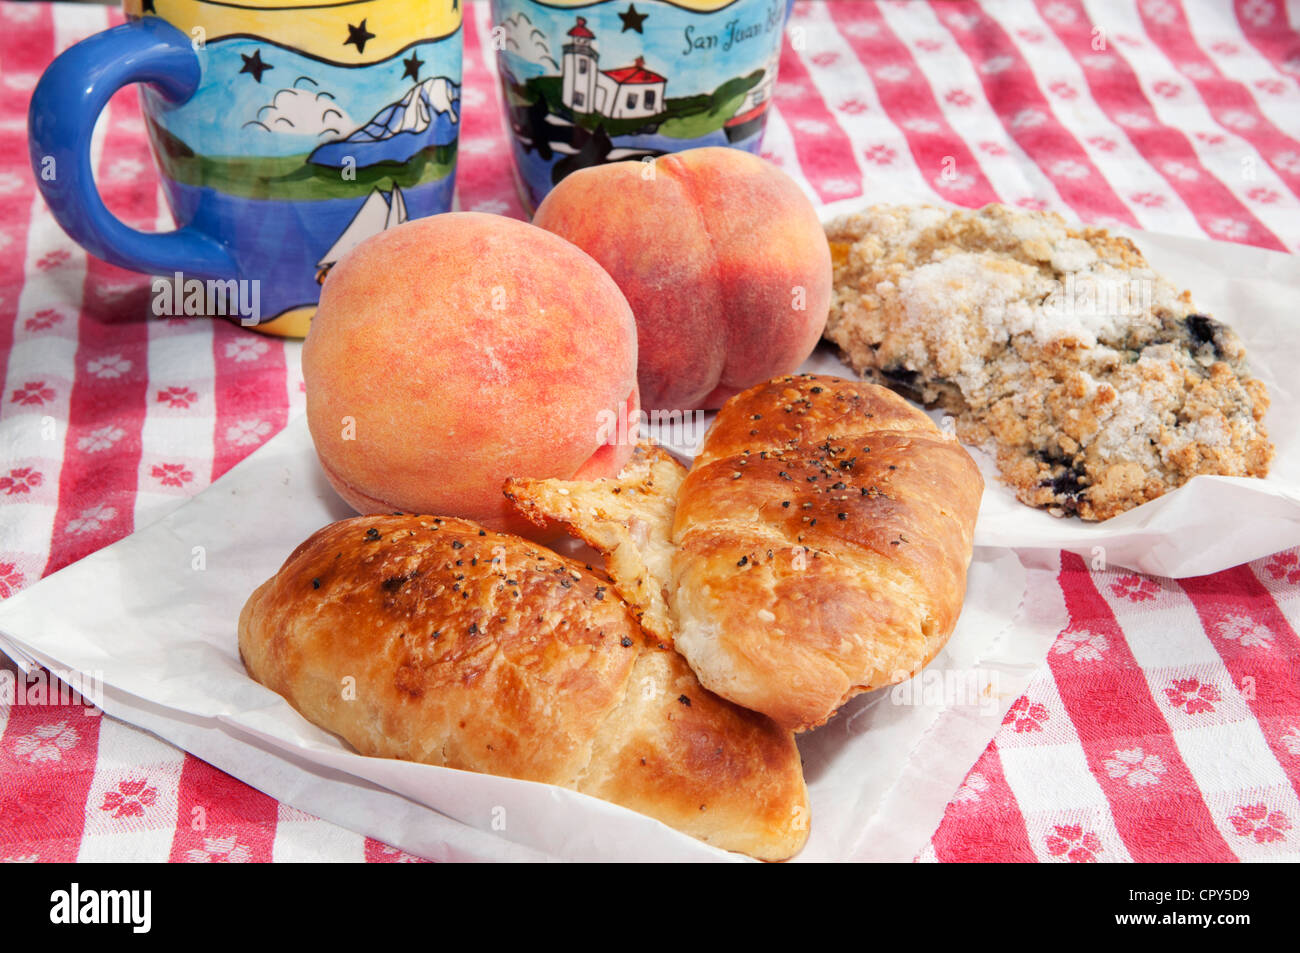 Picnic breakfast of fresh peaches, croissants, a scone and coffee is served on a checkered tablecloth. Stock Photo